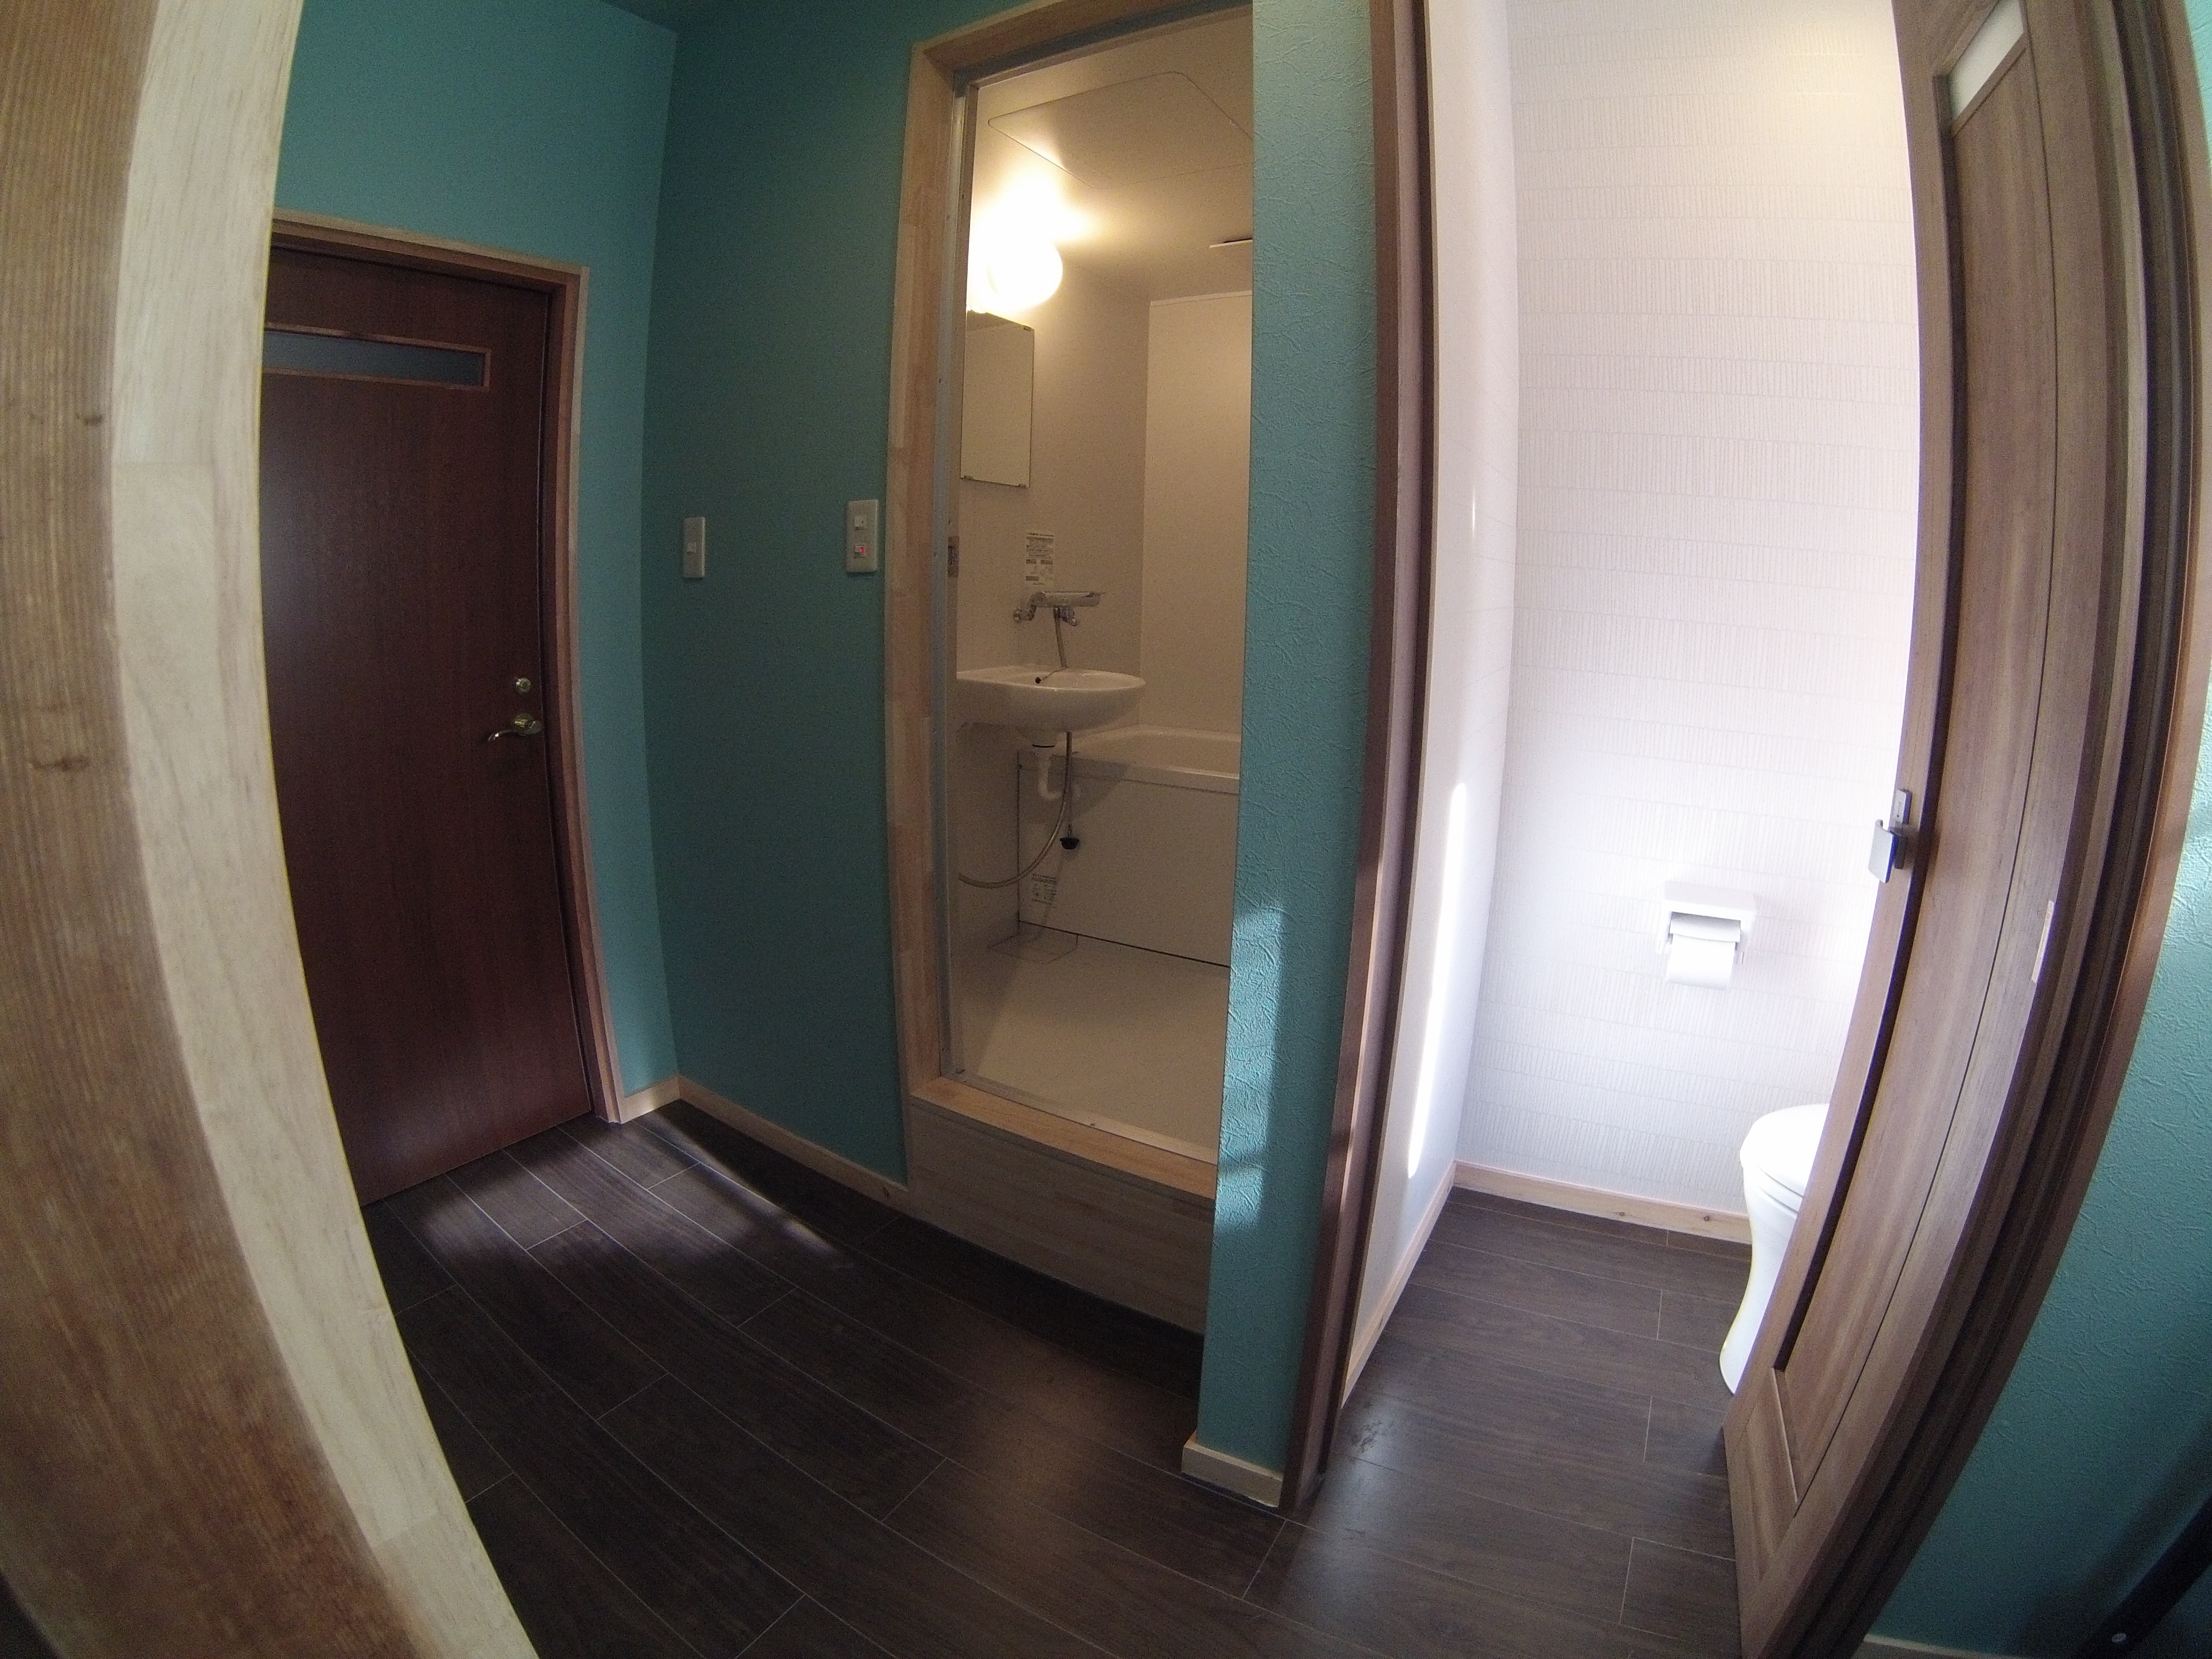 The guest rooms on the 2nd floor of the middle building have been renewed! It comes with a bath and toilet.